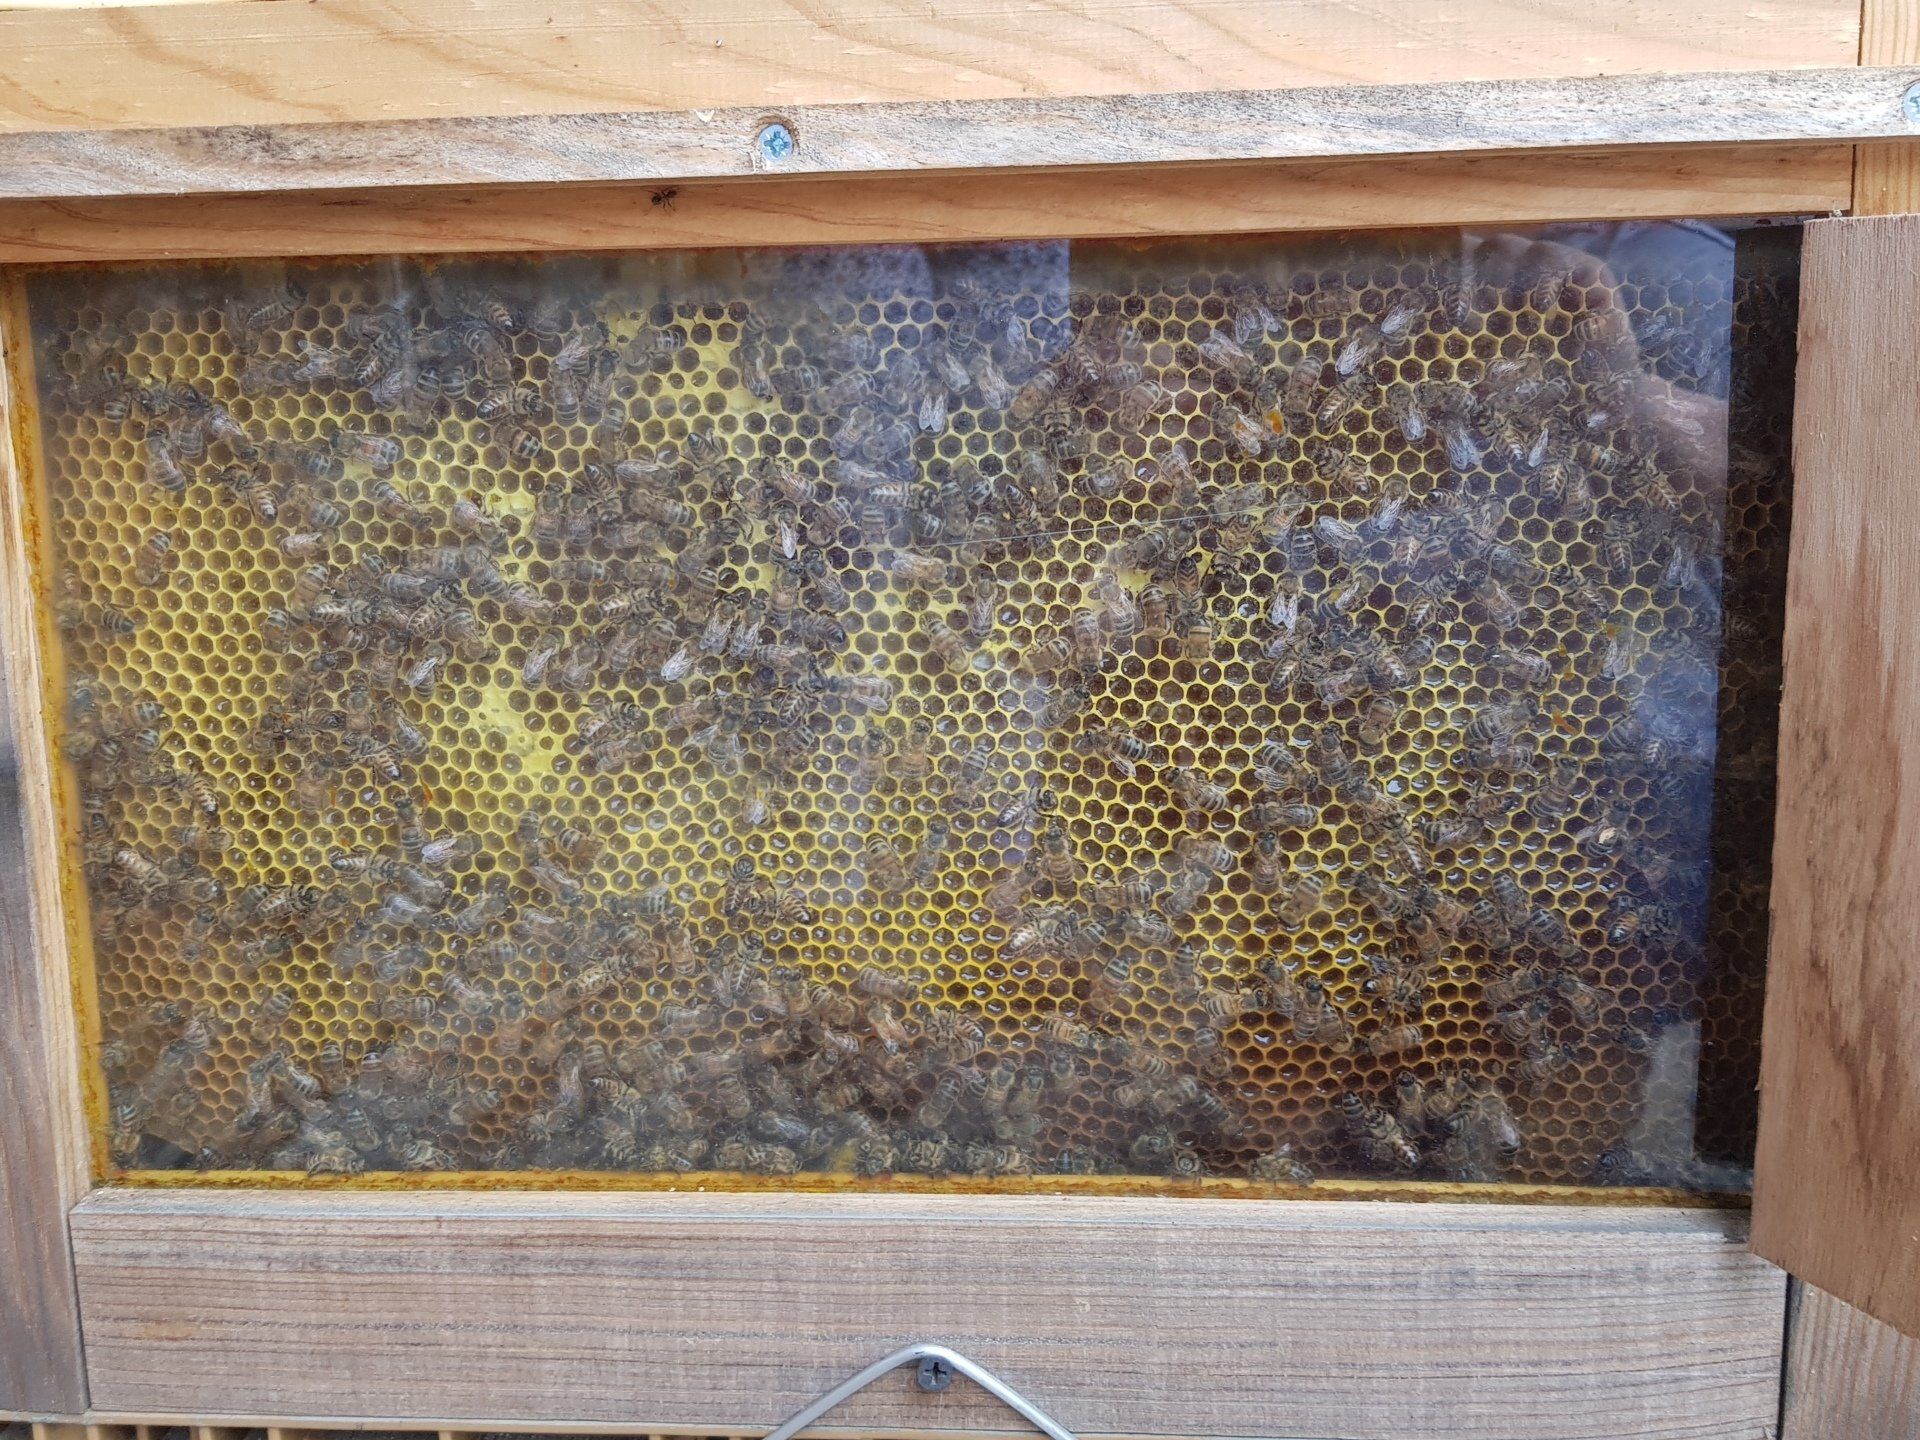 bees working in the hive with a glass wall